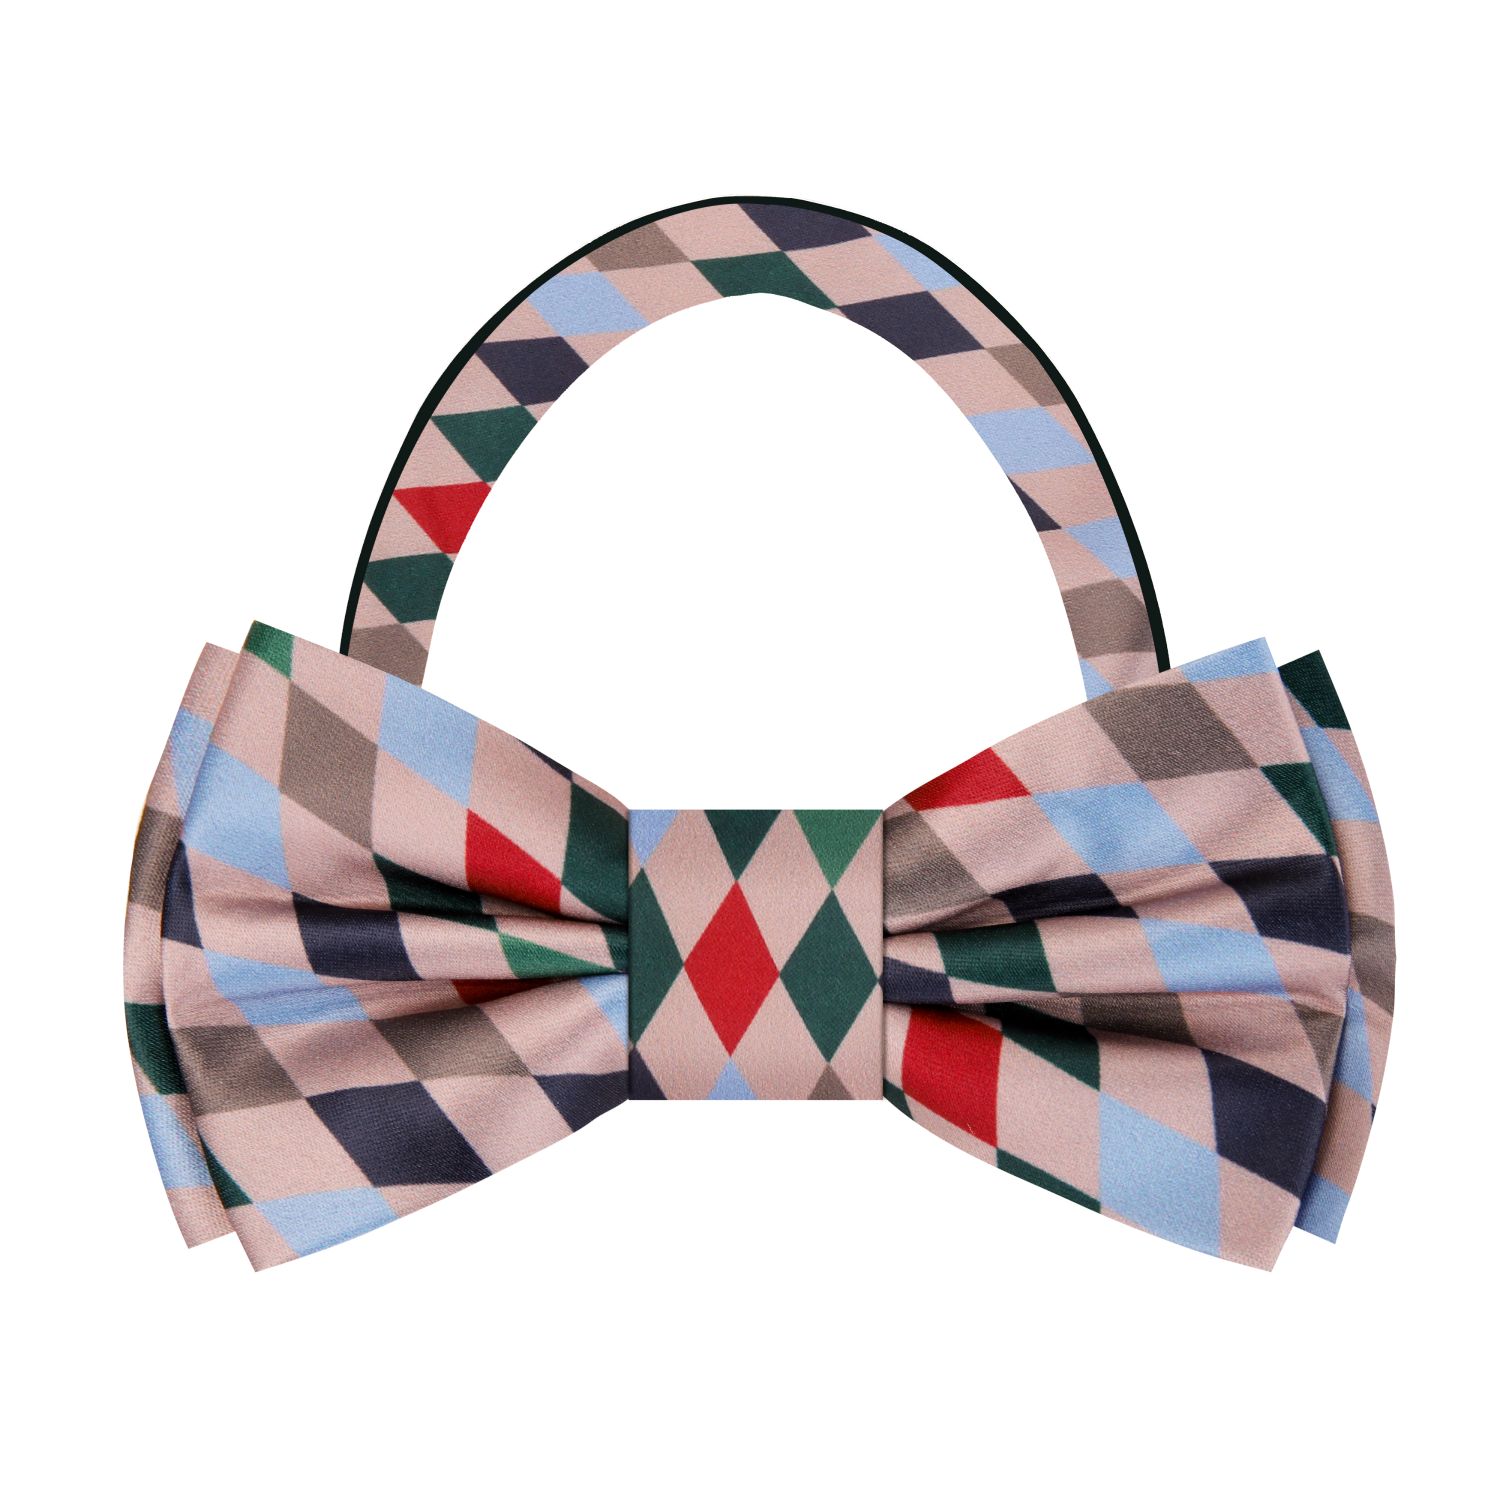 Red, Green, Brown, Blue Harlequin Diamonds Bow Tie Pre Tied